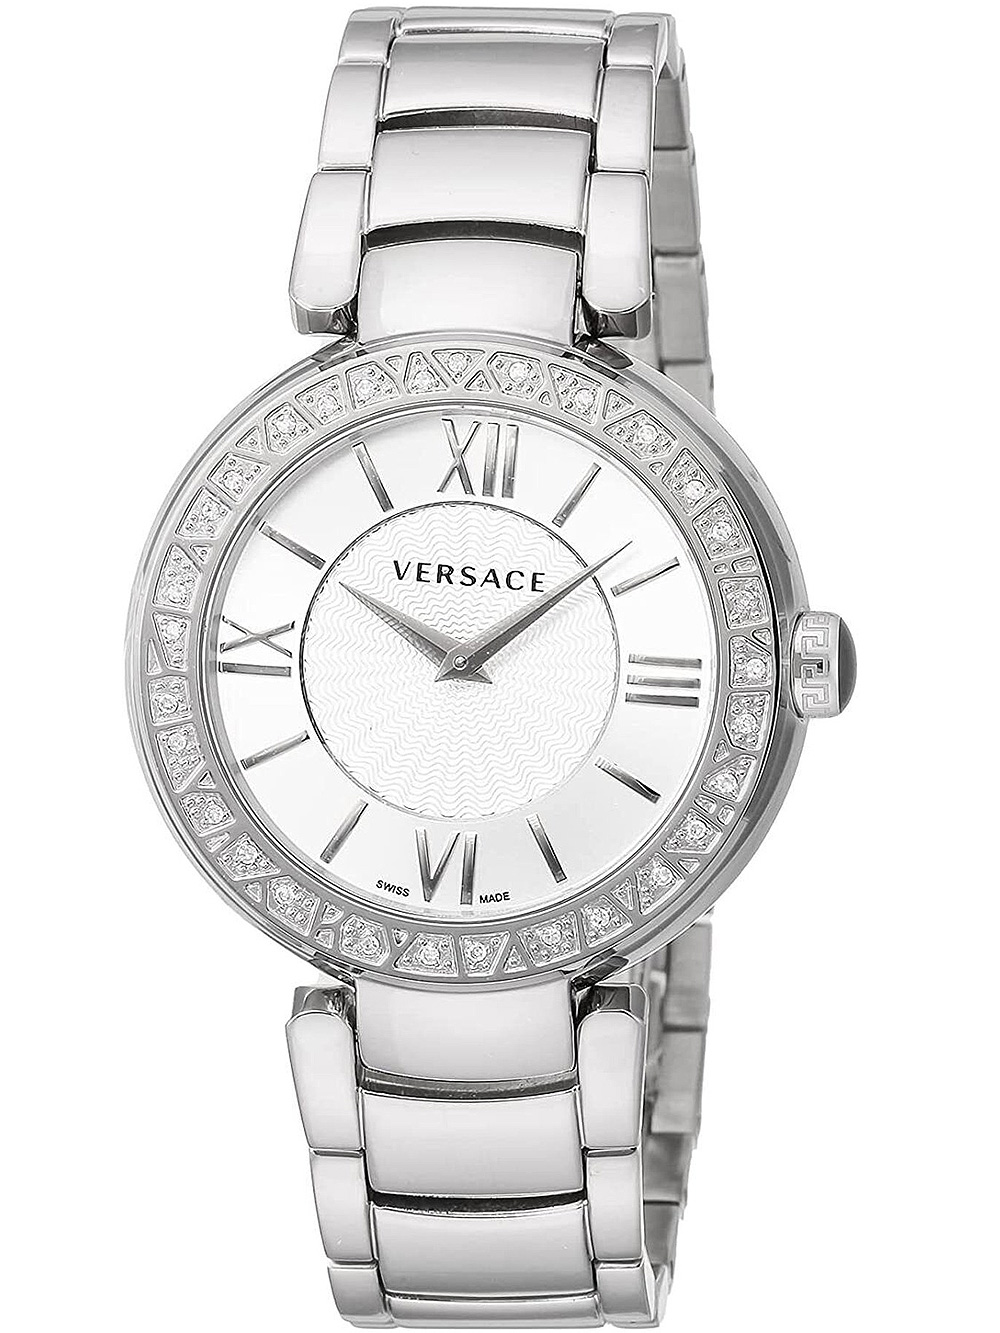 Versace VNC160015 Leda Ladies Watch 38mm 5ATM BY Versace - Wristwatch available at DOYUF